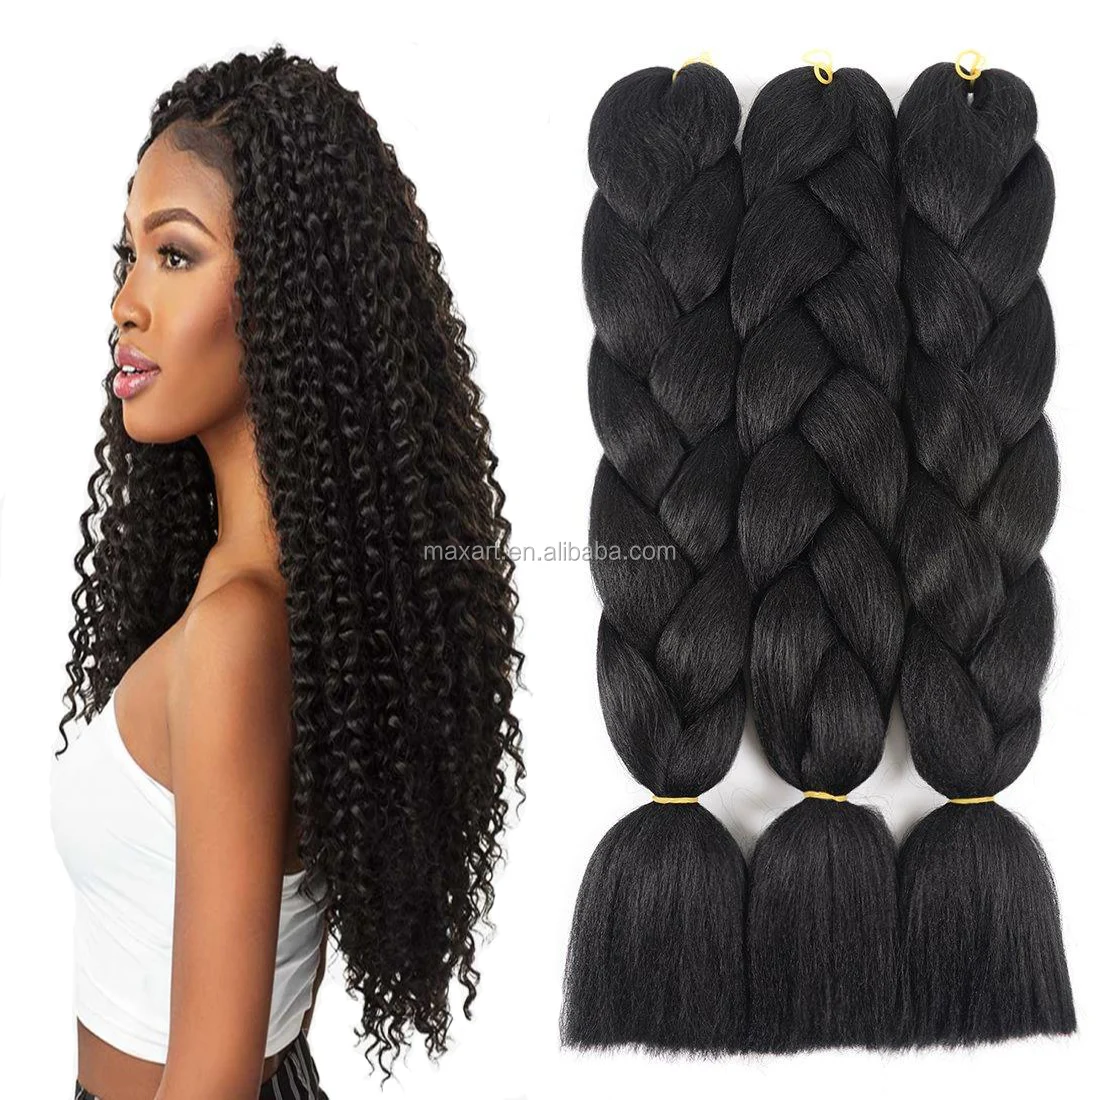 

Cheap Wholesale Super Synthetic 24inch Jumbo Hair Braid Factory Price Hair Extension - Plain Color, As picture shows